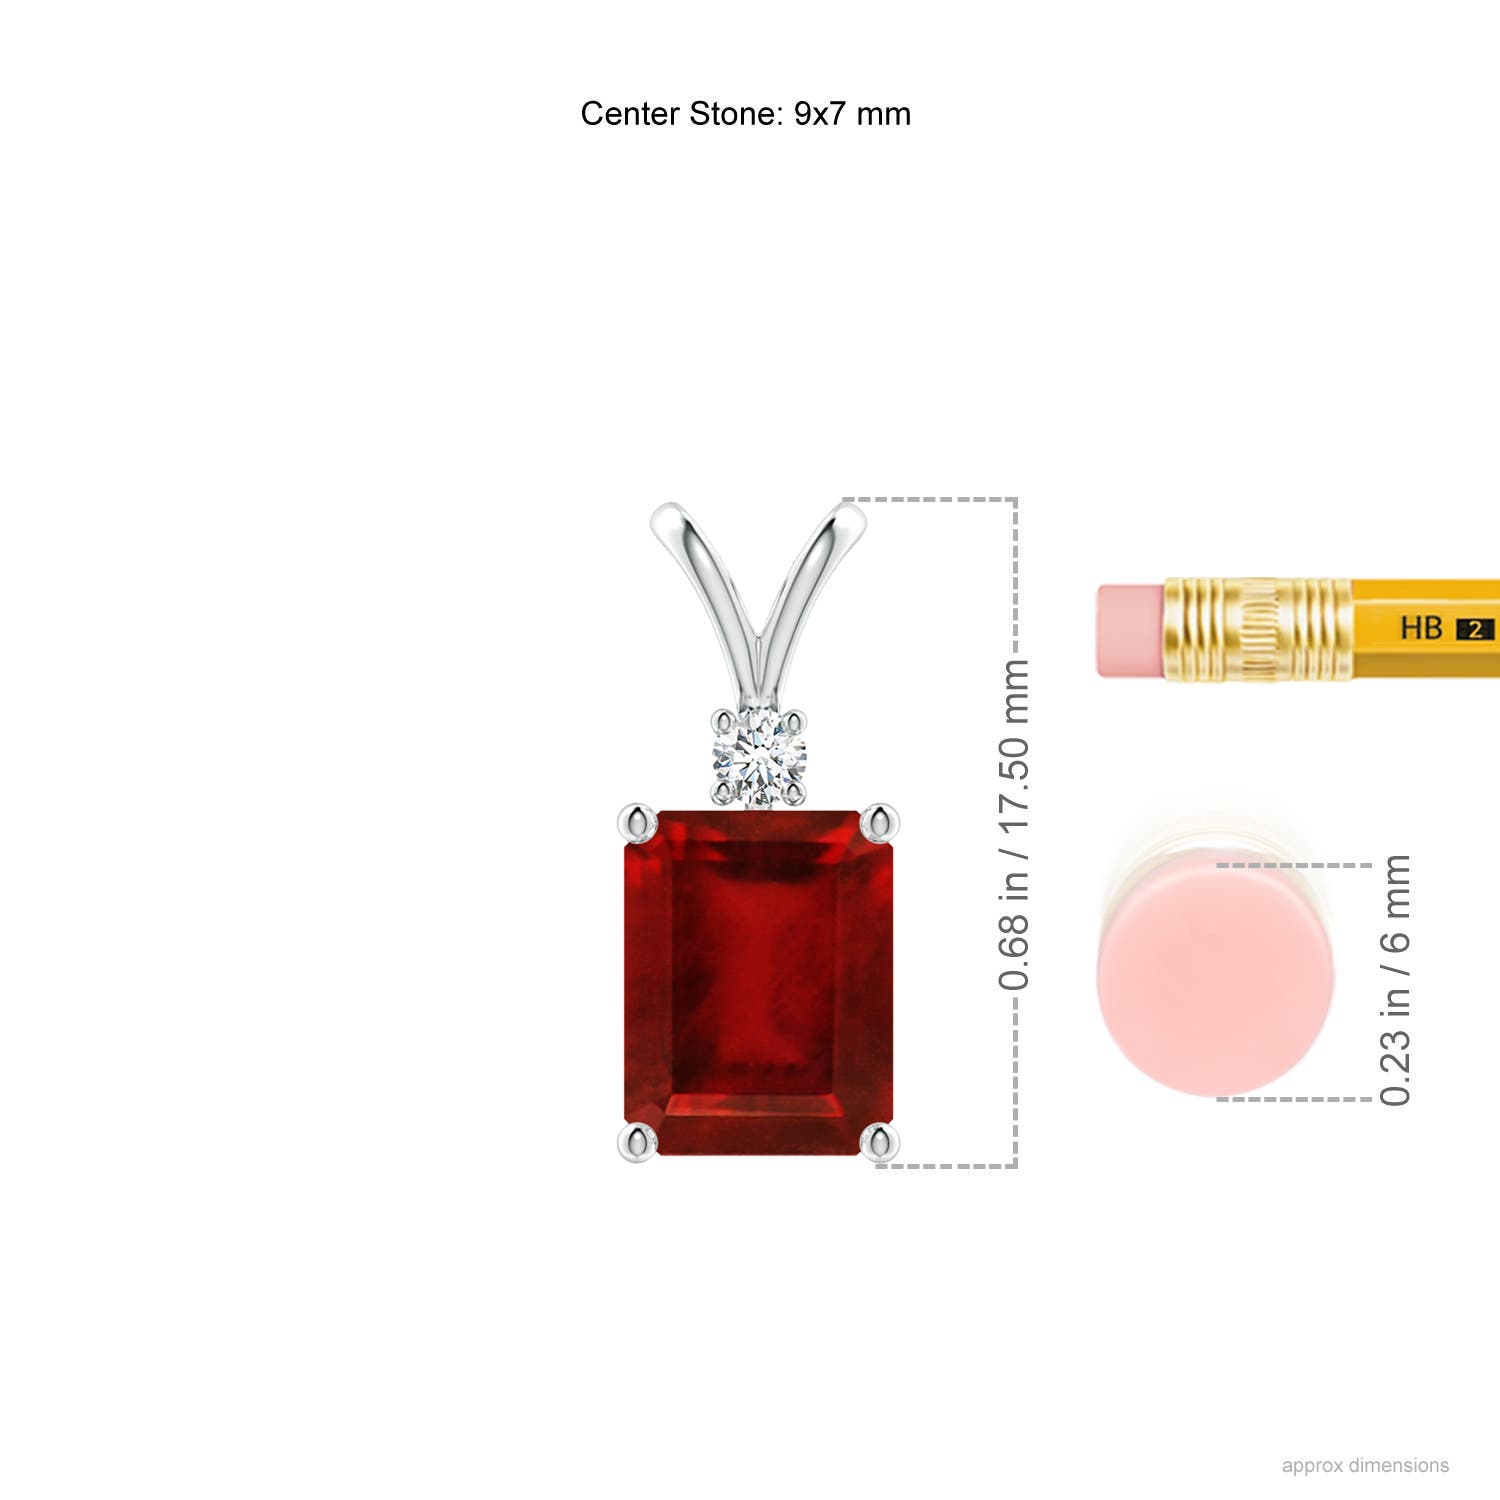 AAAA - Ruby / 3.07 CT / 14 KT White Gold